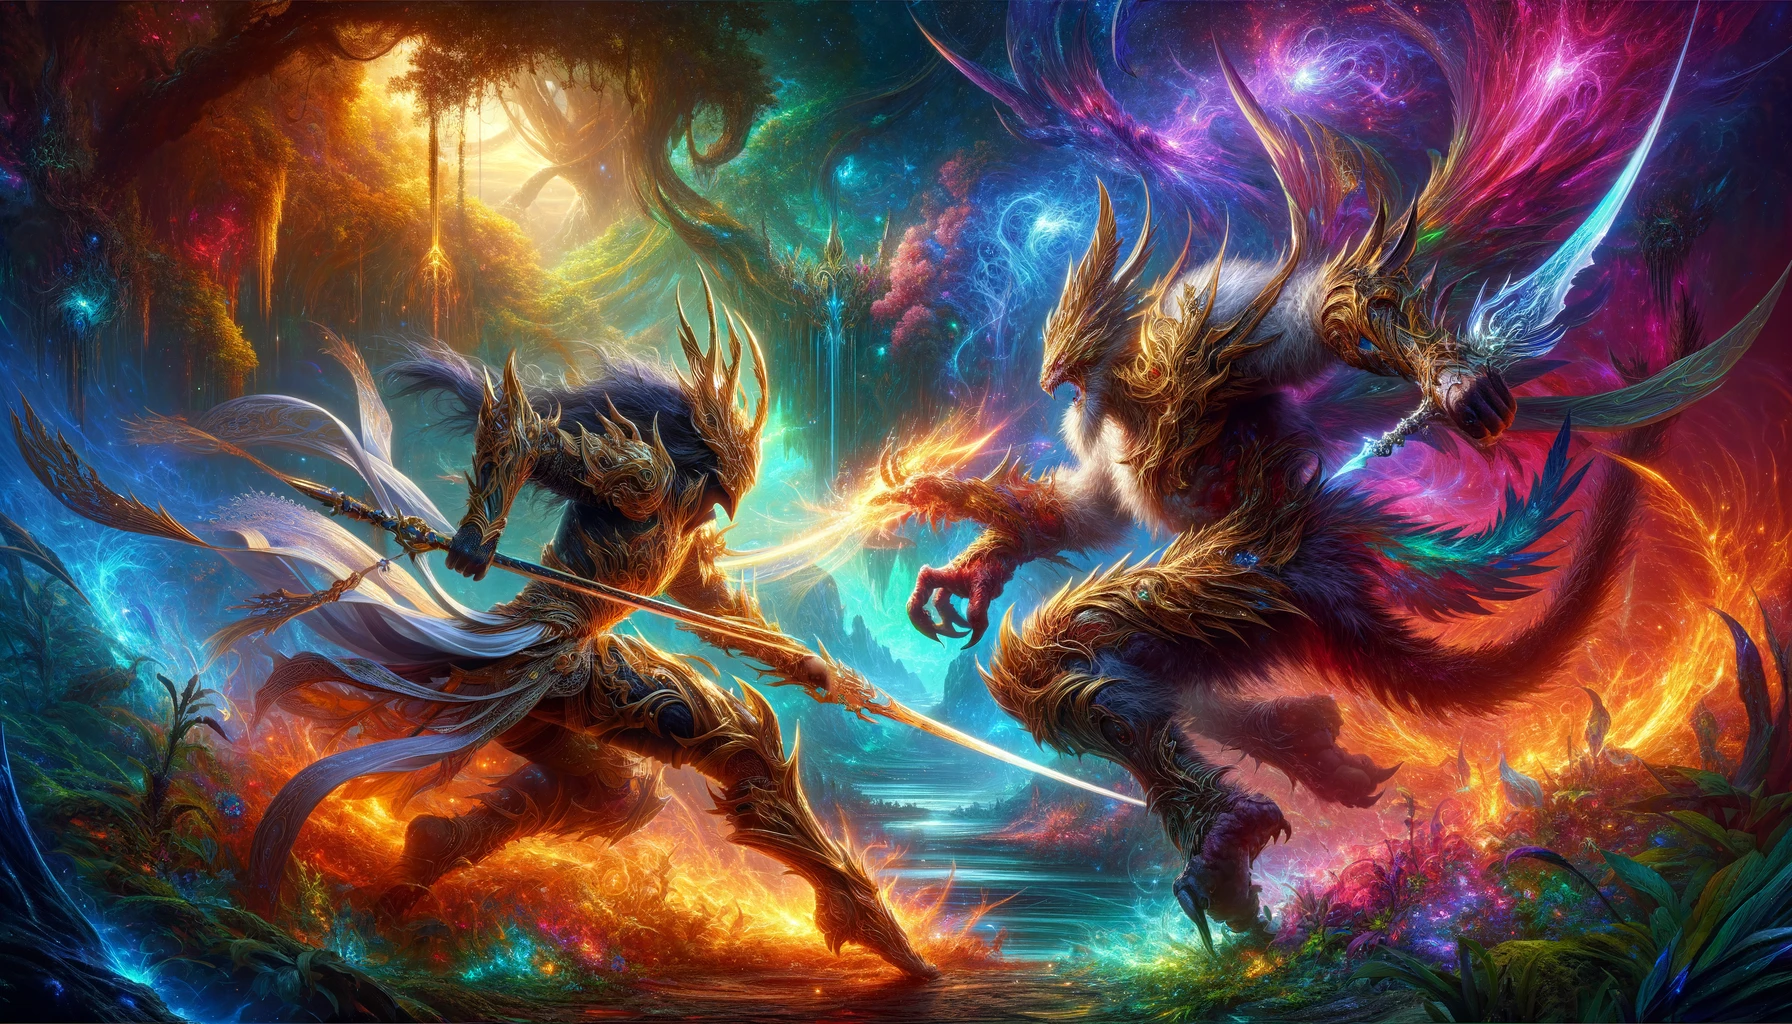 A wide image capturing a dynamic battle between two warriors in a fantastical setting, one humanoid in ornate armor parrying an attack, and the other a fierce beast-like creature, amidst an eerie, colorful landscape.